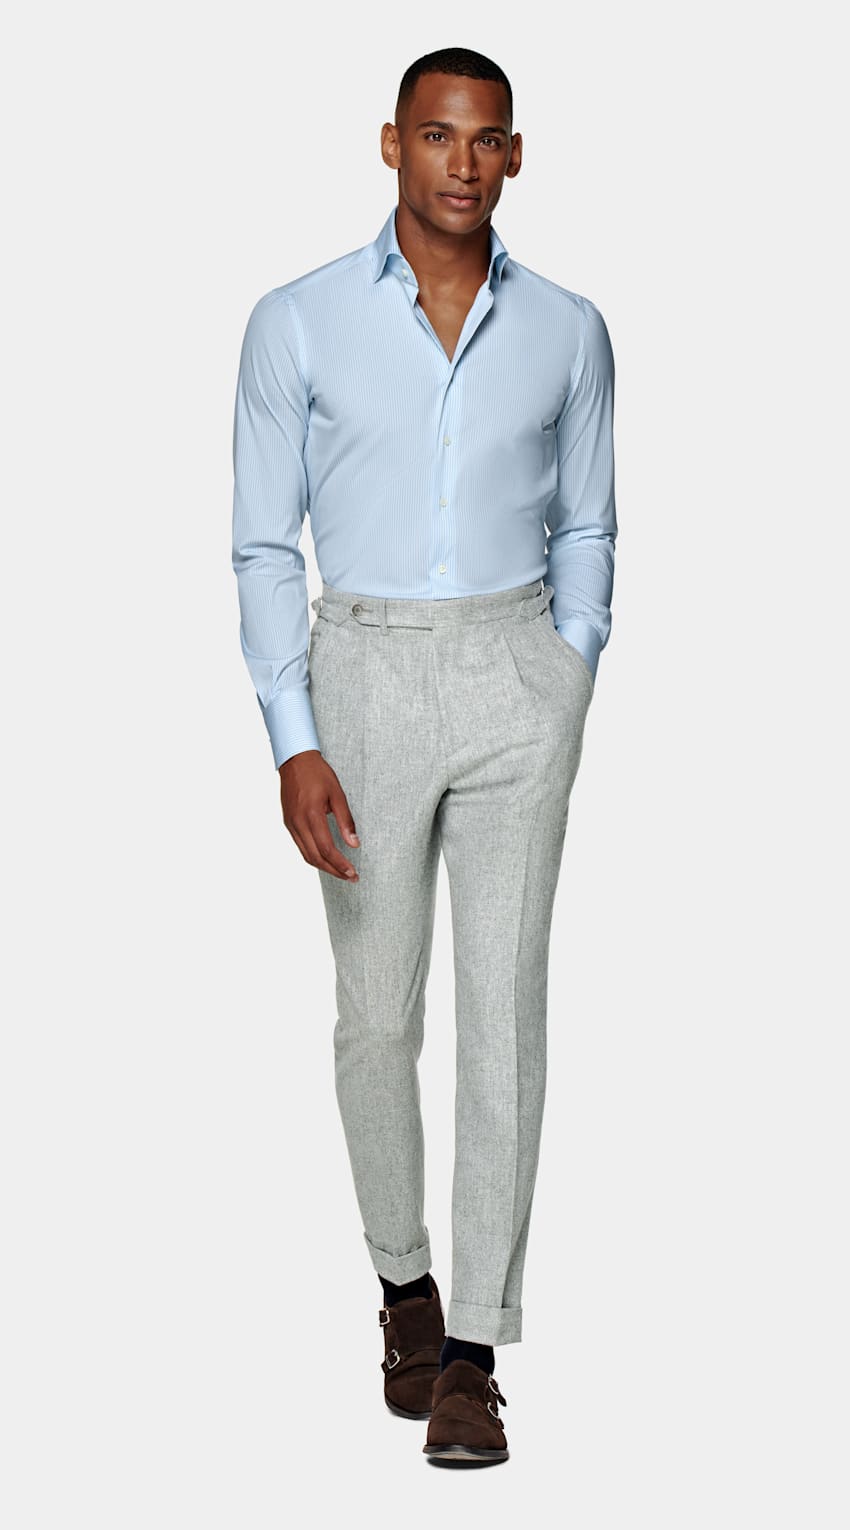 SUITSUPPLY Stretch Cotton Polyamide by Reggiani, Italy Light Blue Striped Extra Slim Fit Shirt